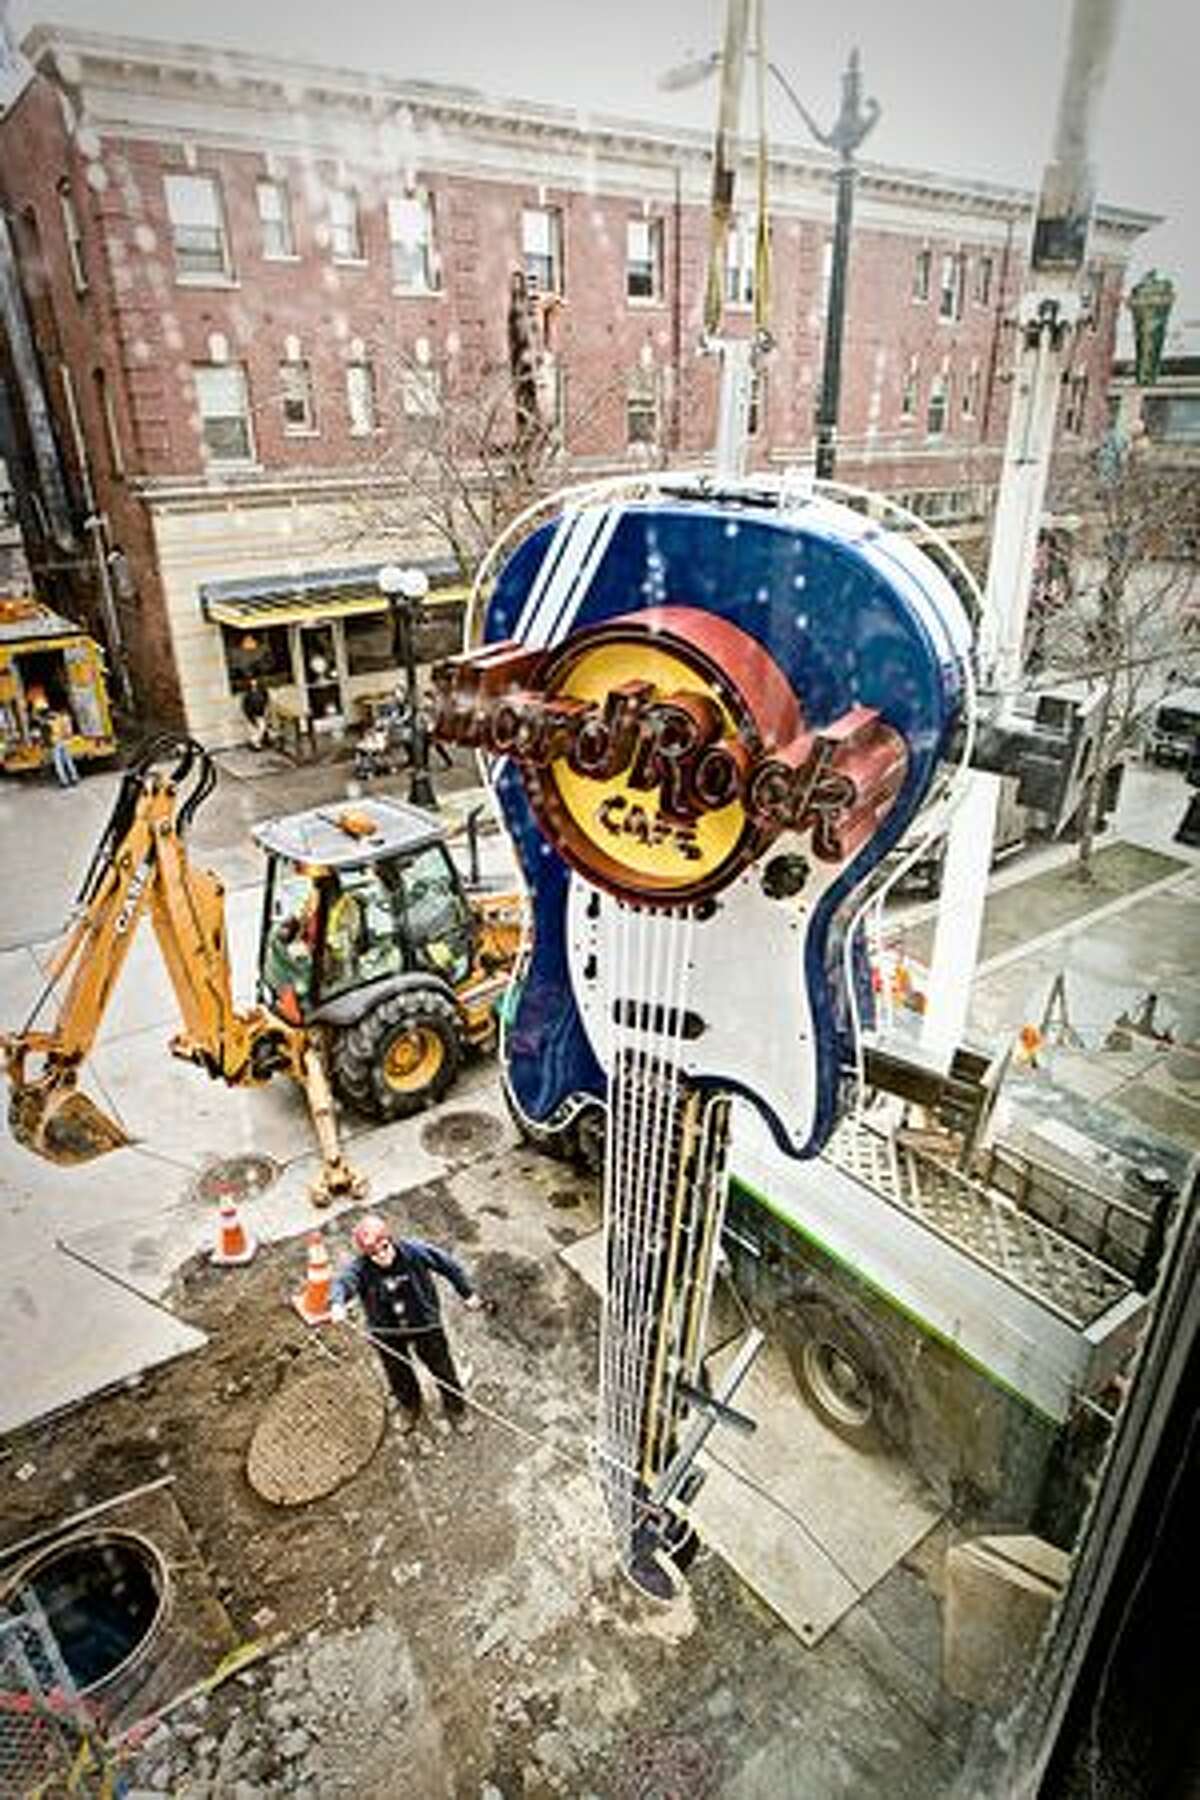 Crews install a model Fender Mustang guitar at 116 Pike St., the site of Seattle's new Hard Rock Cafe. (Photo by Mat Hayward for Hard Rock Cafe Seattle)